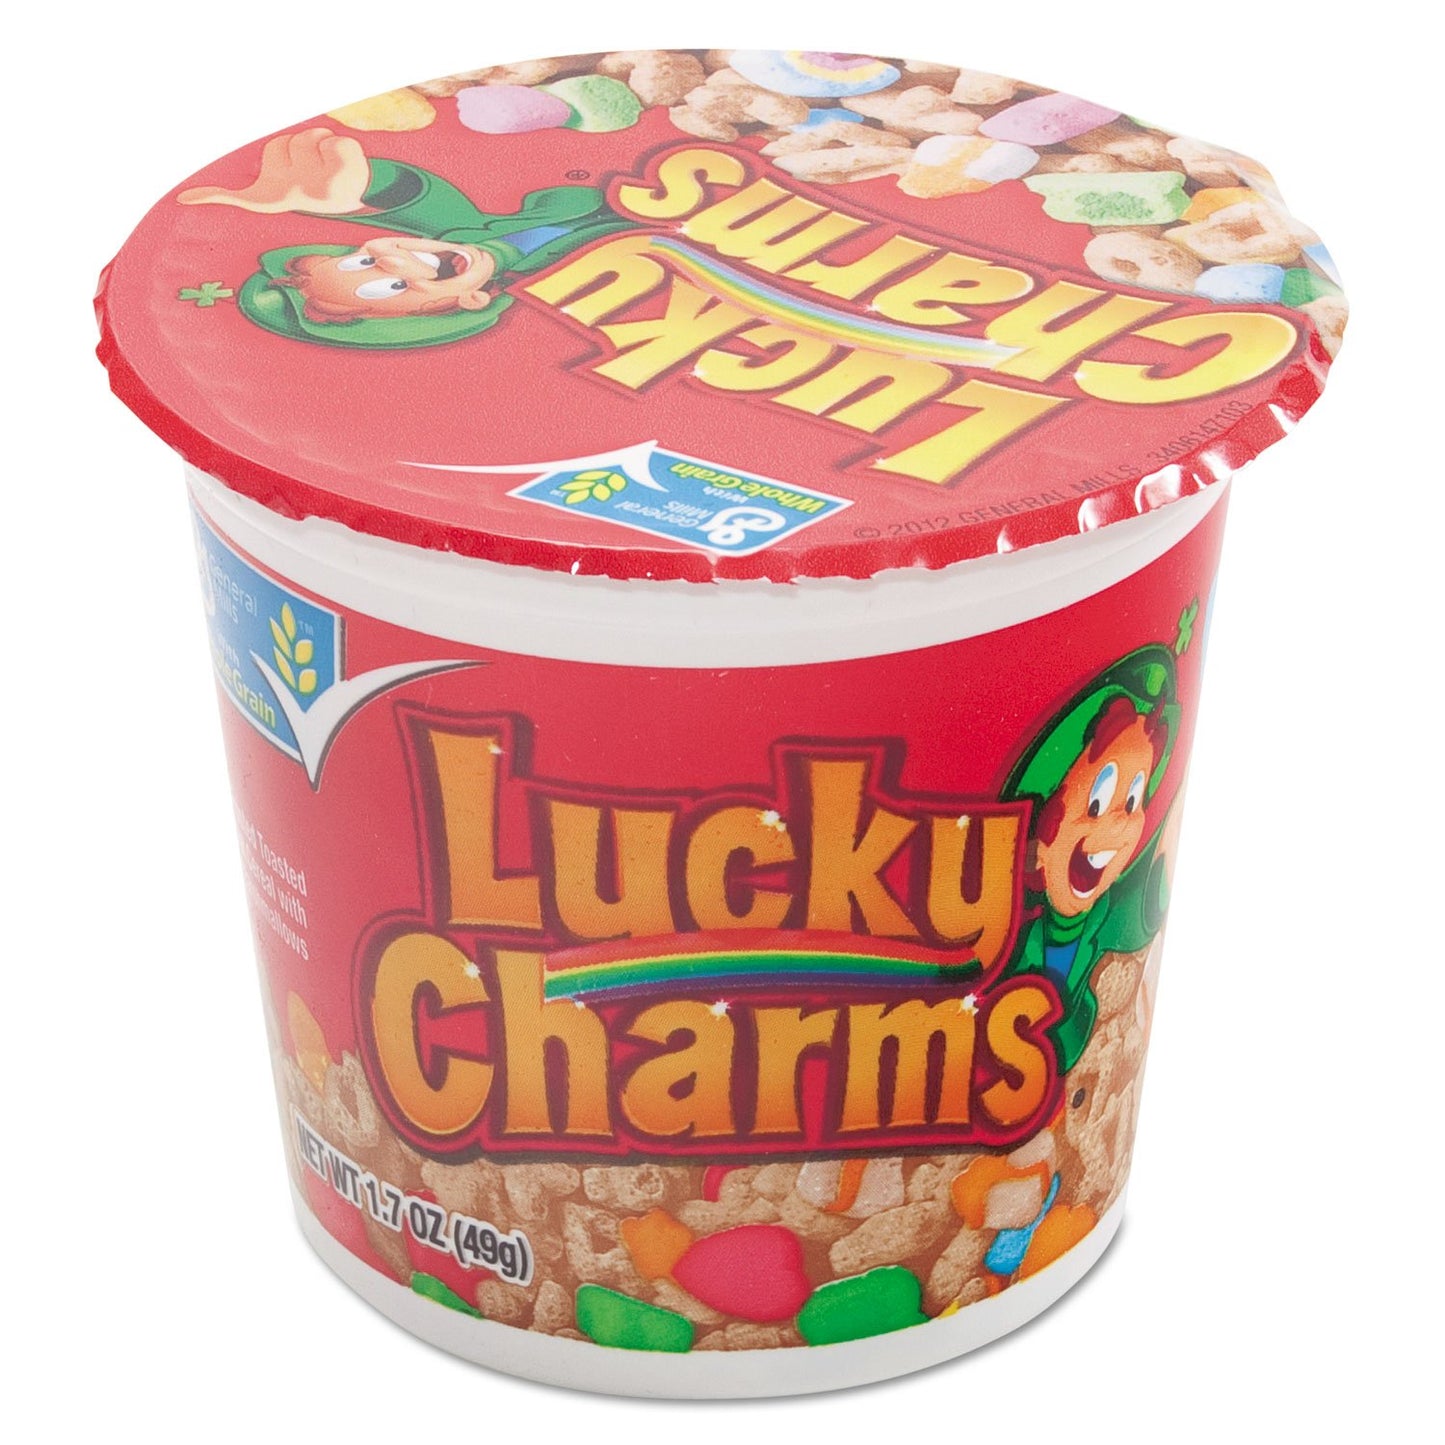 "Lucky Charms Marshmellows" with FREE CUP O'Cereal!